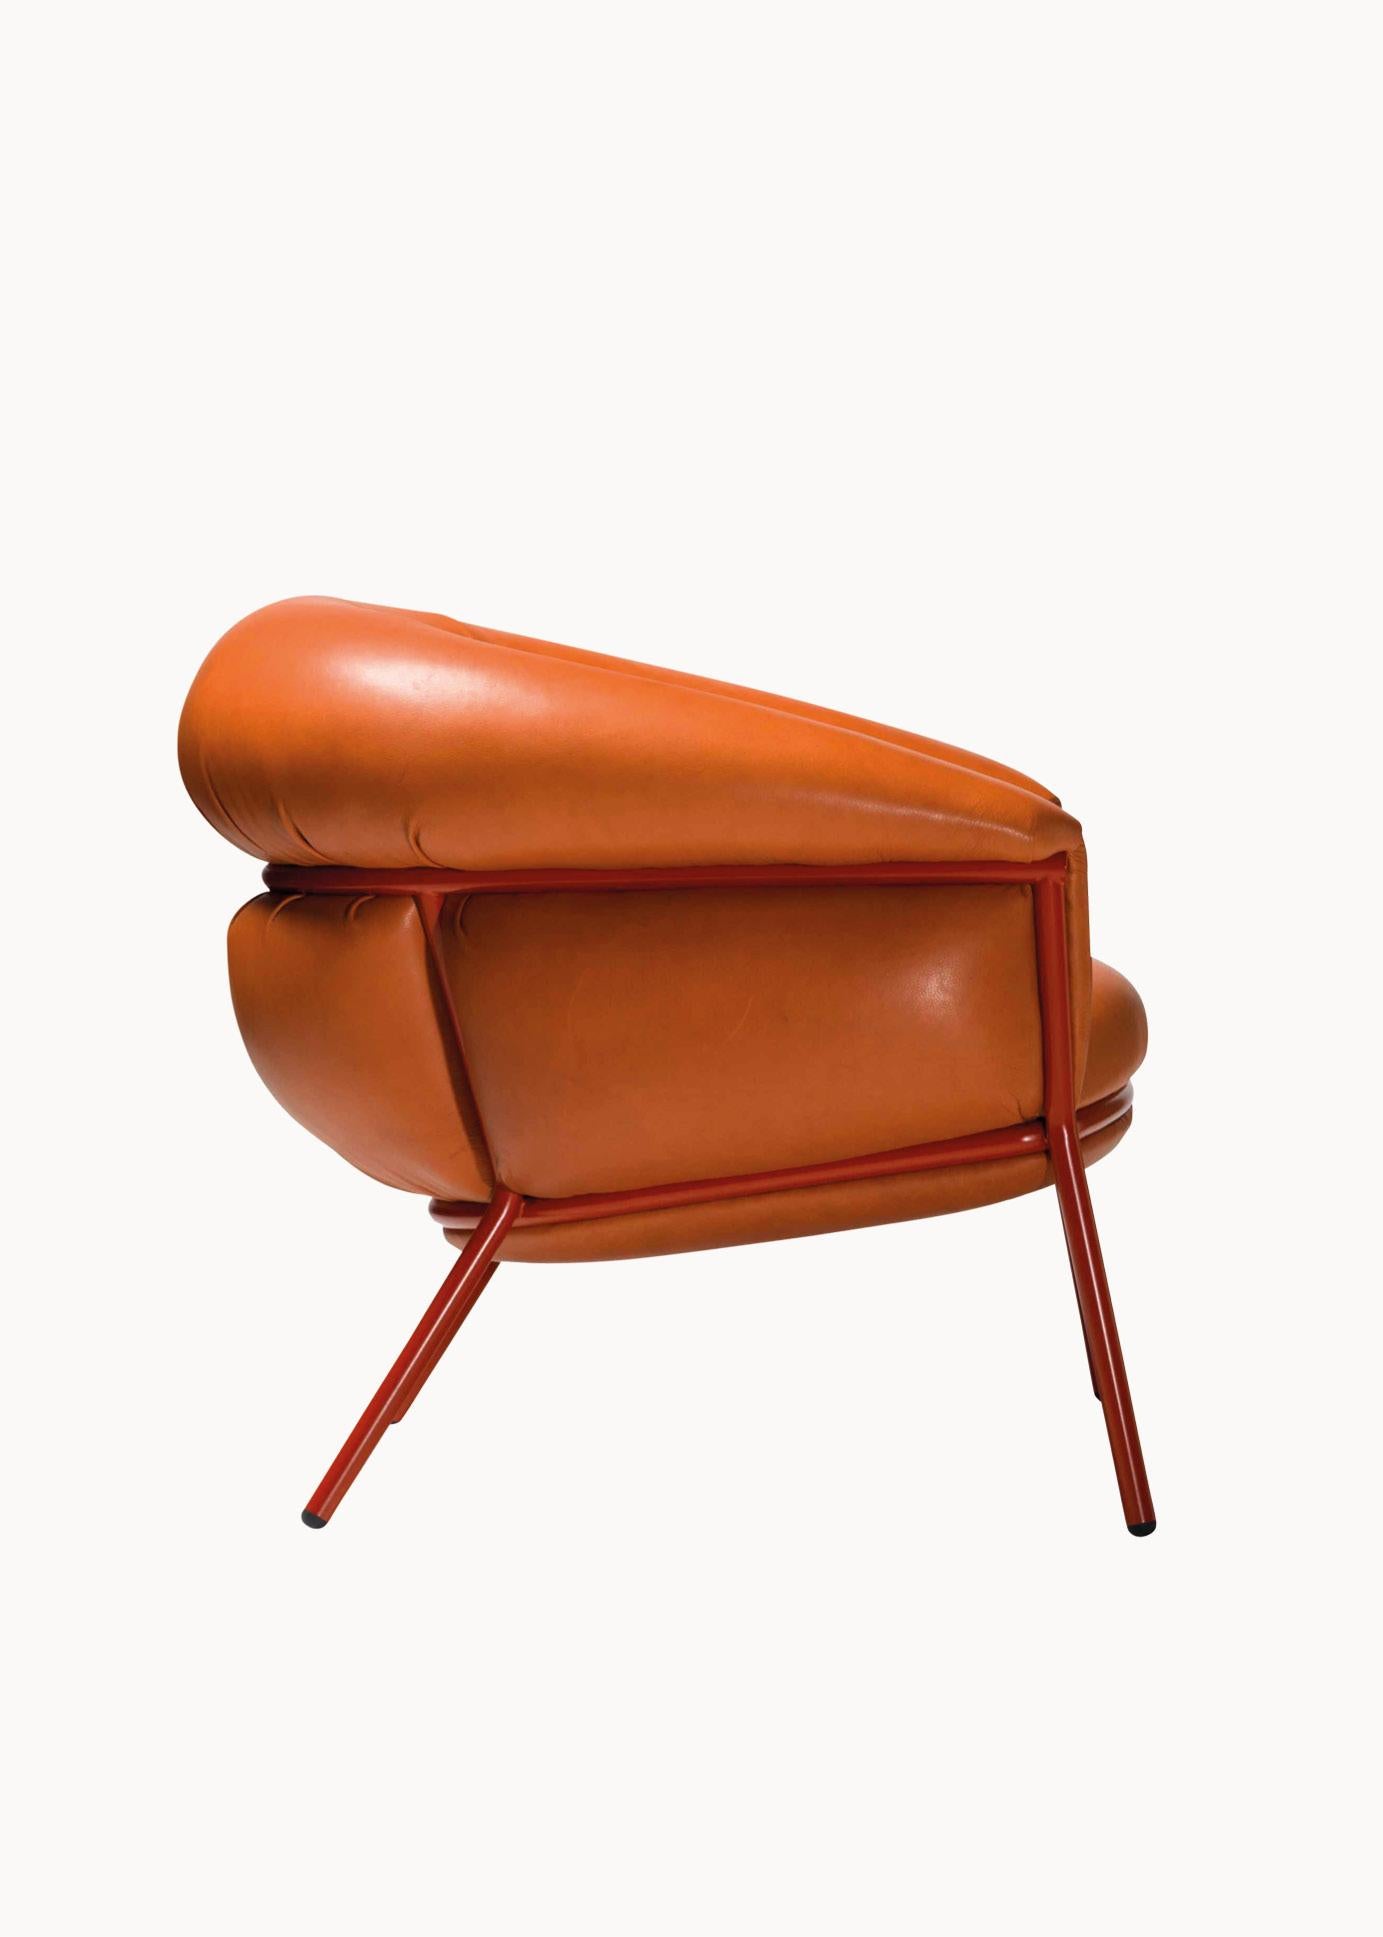 Spanish Grasso armchair by Stephen Burks organge padded leather, painted red structure For Sale